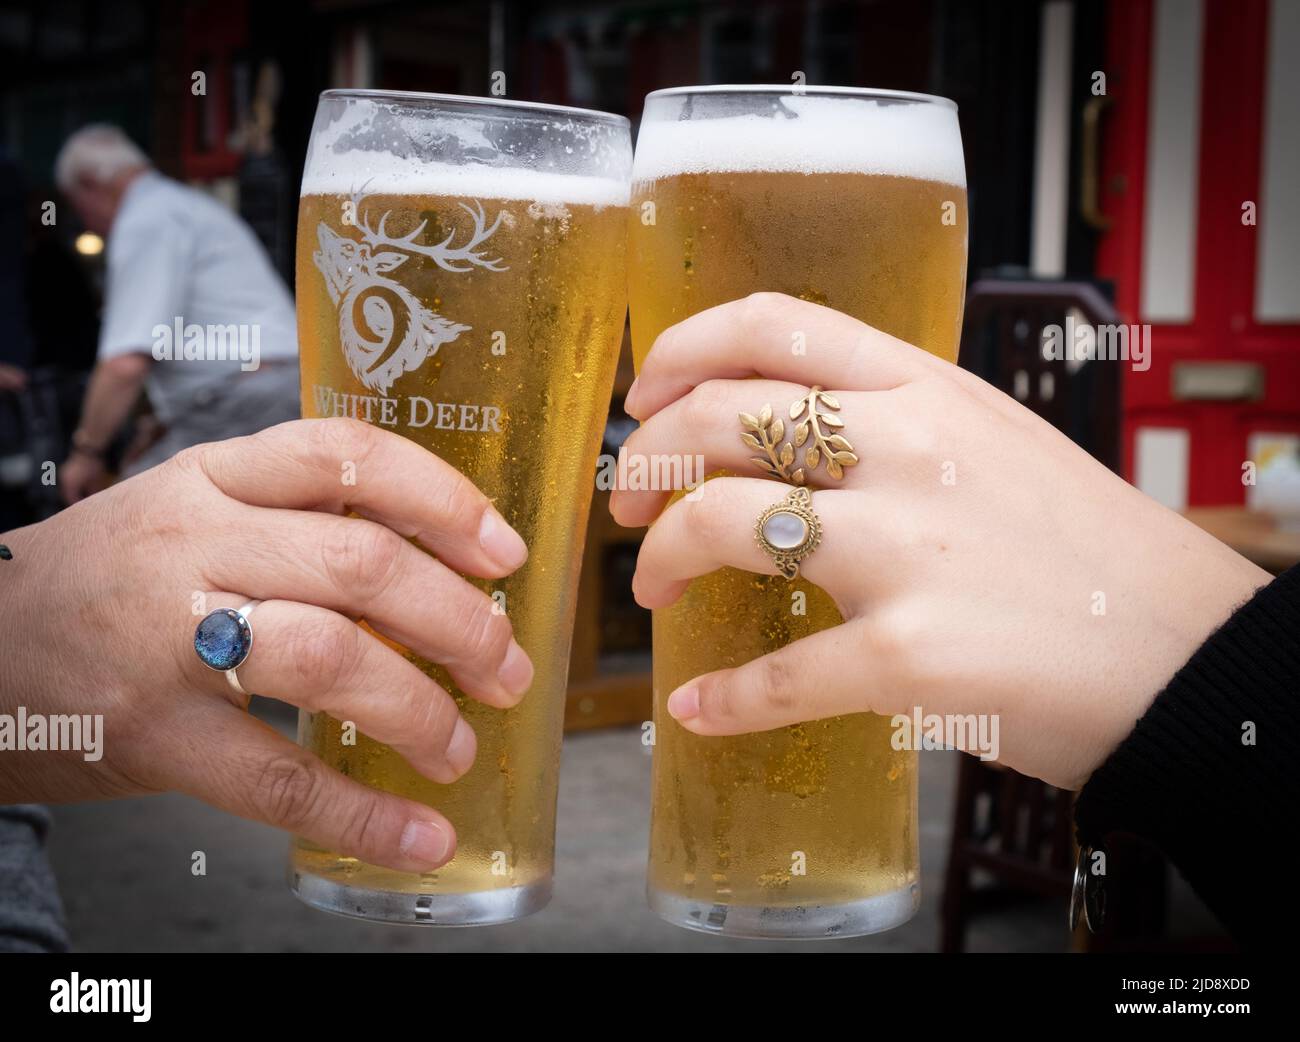 People celebrating with a toast cheers their glasses of beer pints together in a gesture of celebration. Stock Photo